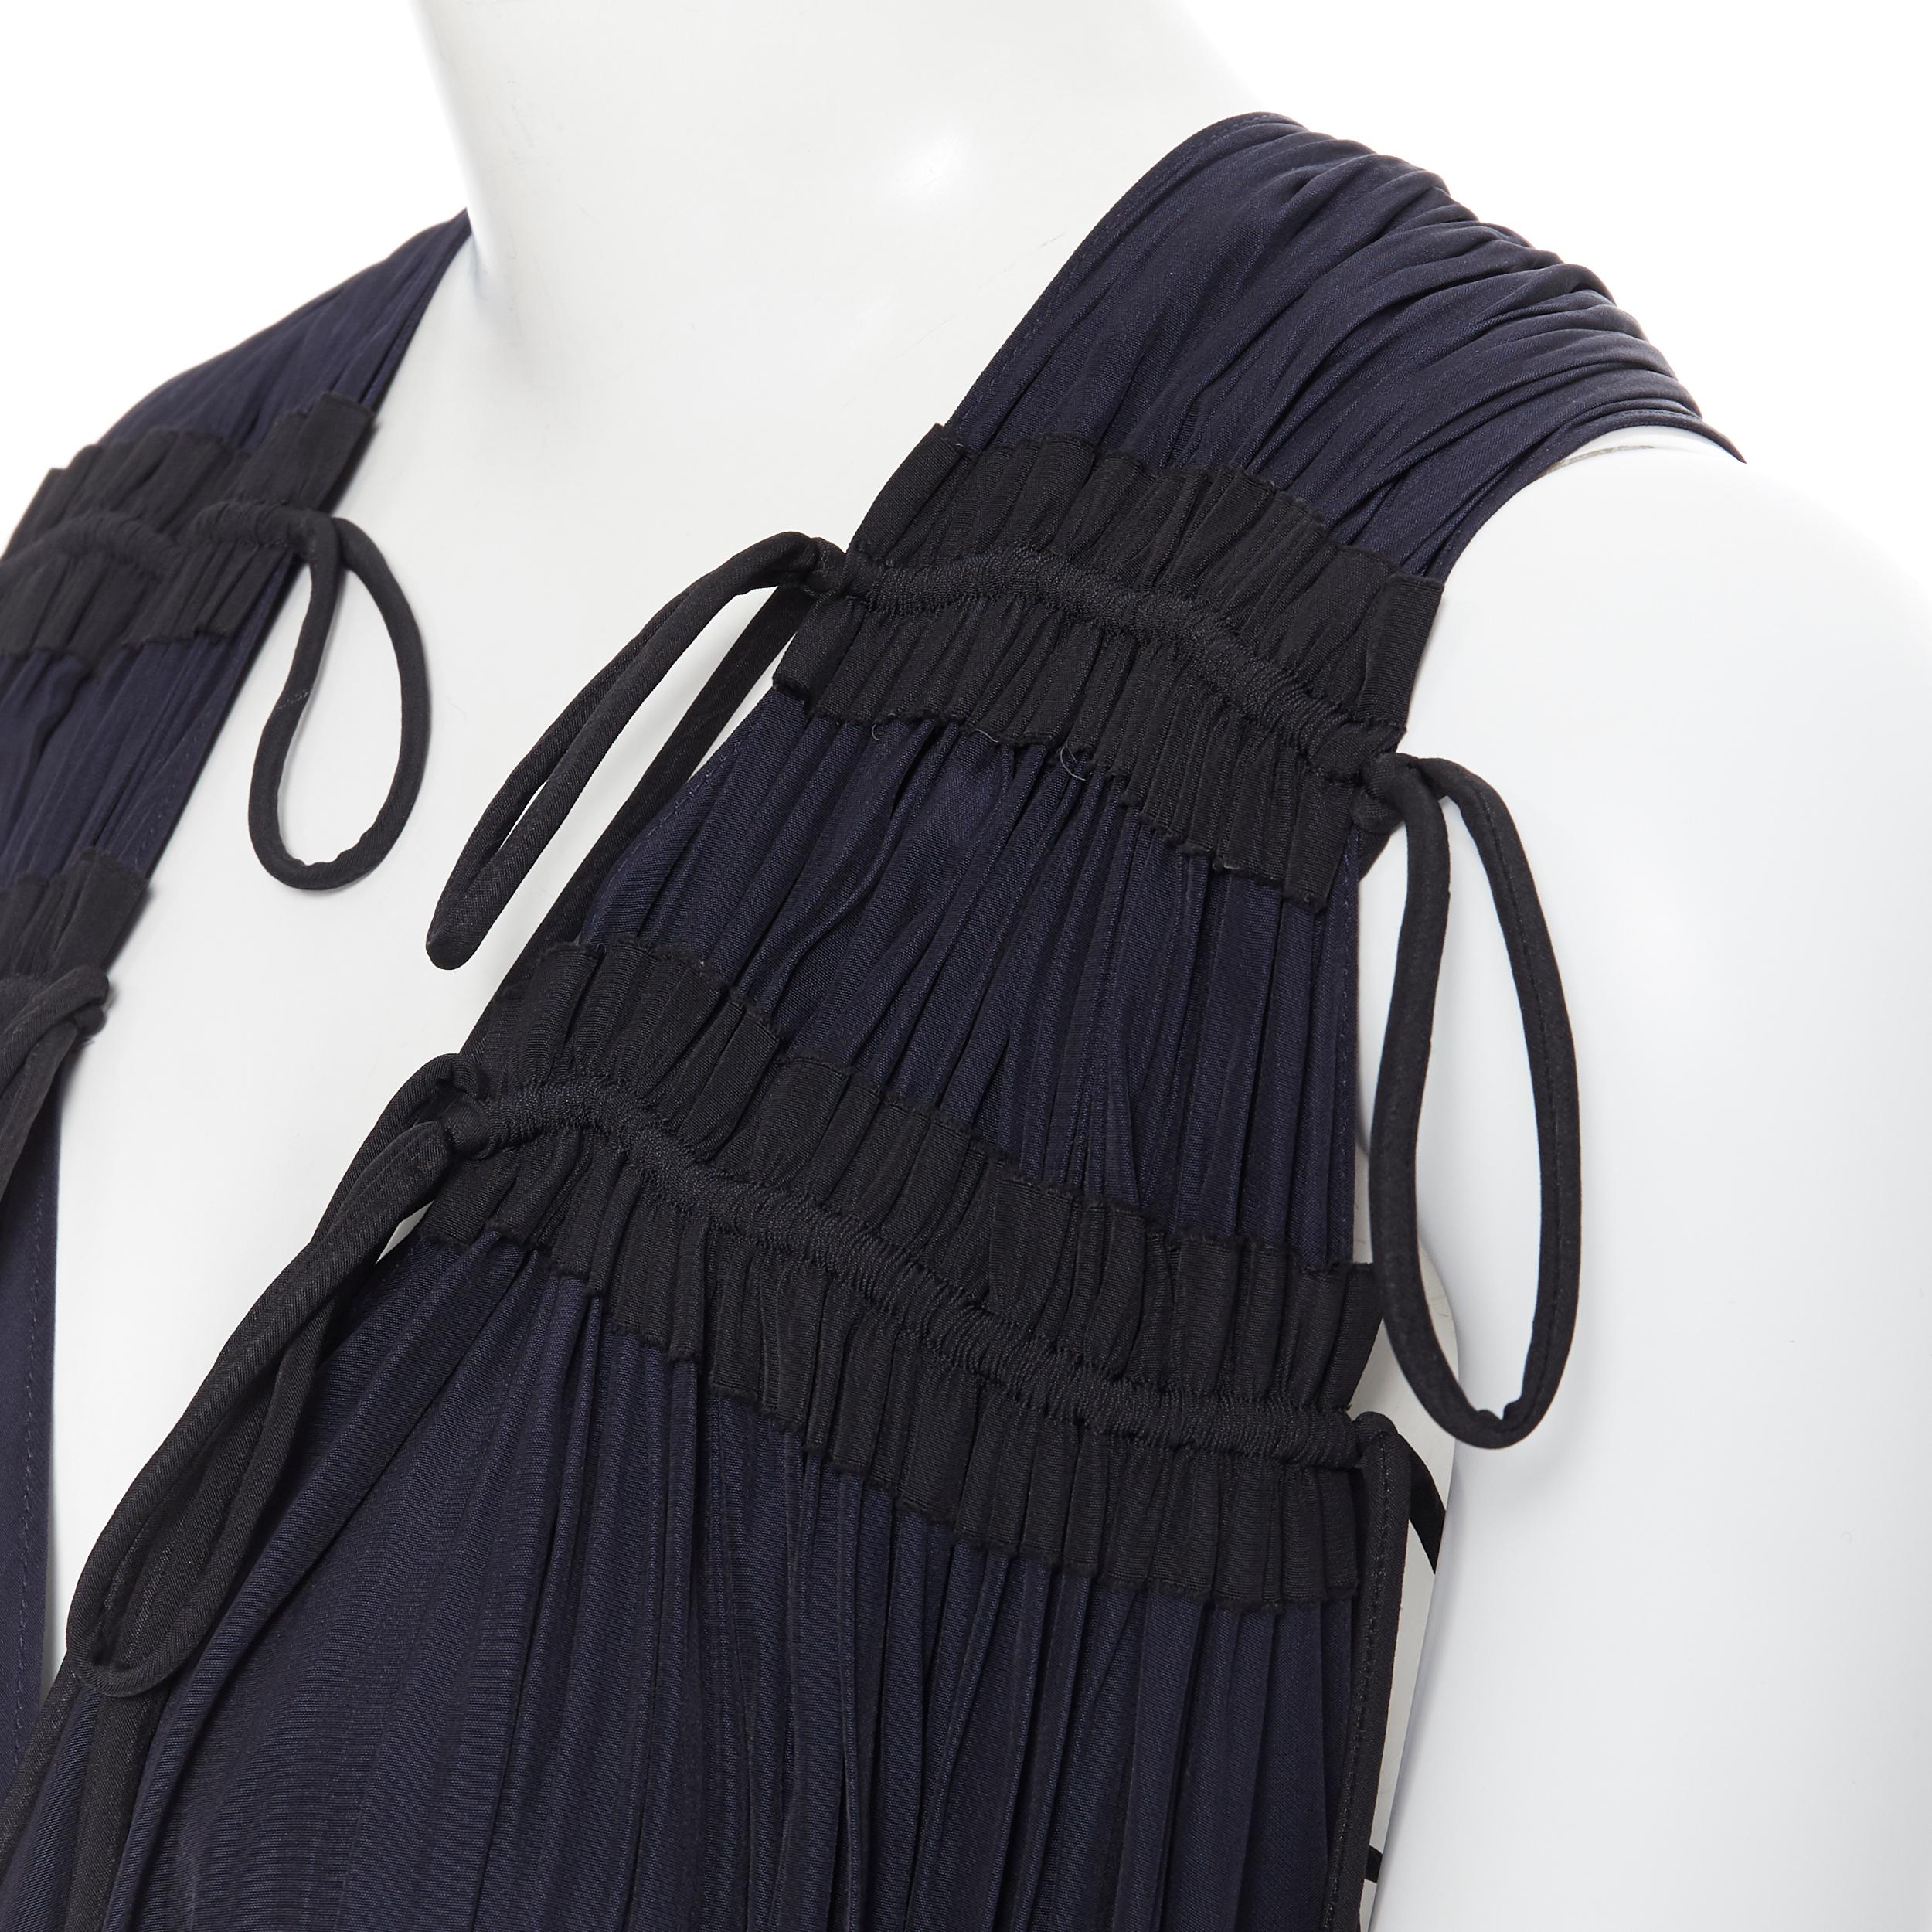 new LANVIN Elbaz midnight blue black pleated tie detail maxi dress FR34 XS
Brand: Lanvin
Designer: Alber Elbaz
Model Name / Style: Gown
Material: Polyester
Color: Navy, black
Pattern: Solid
Extra Detail: V-neck. Gold-tone hardware. Ruched detailing.